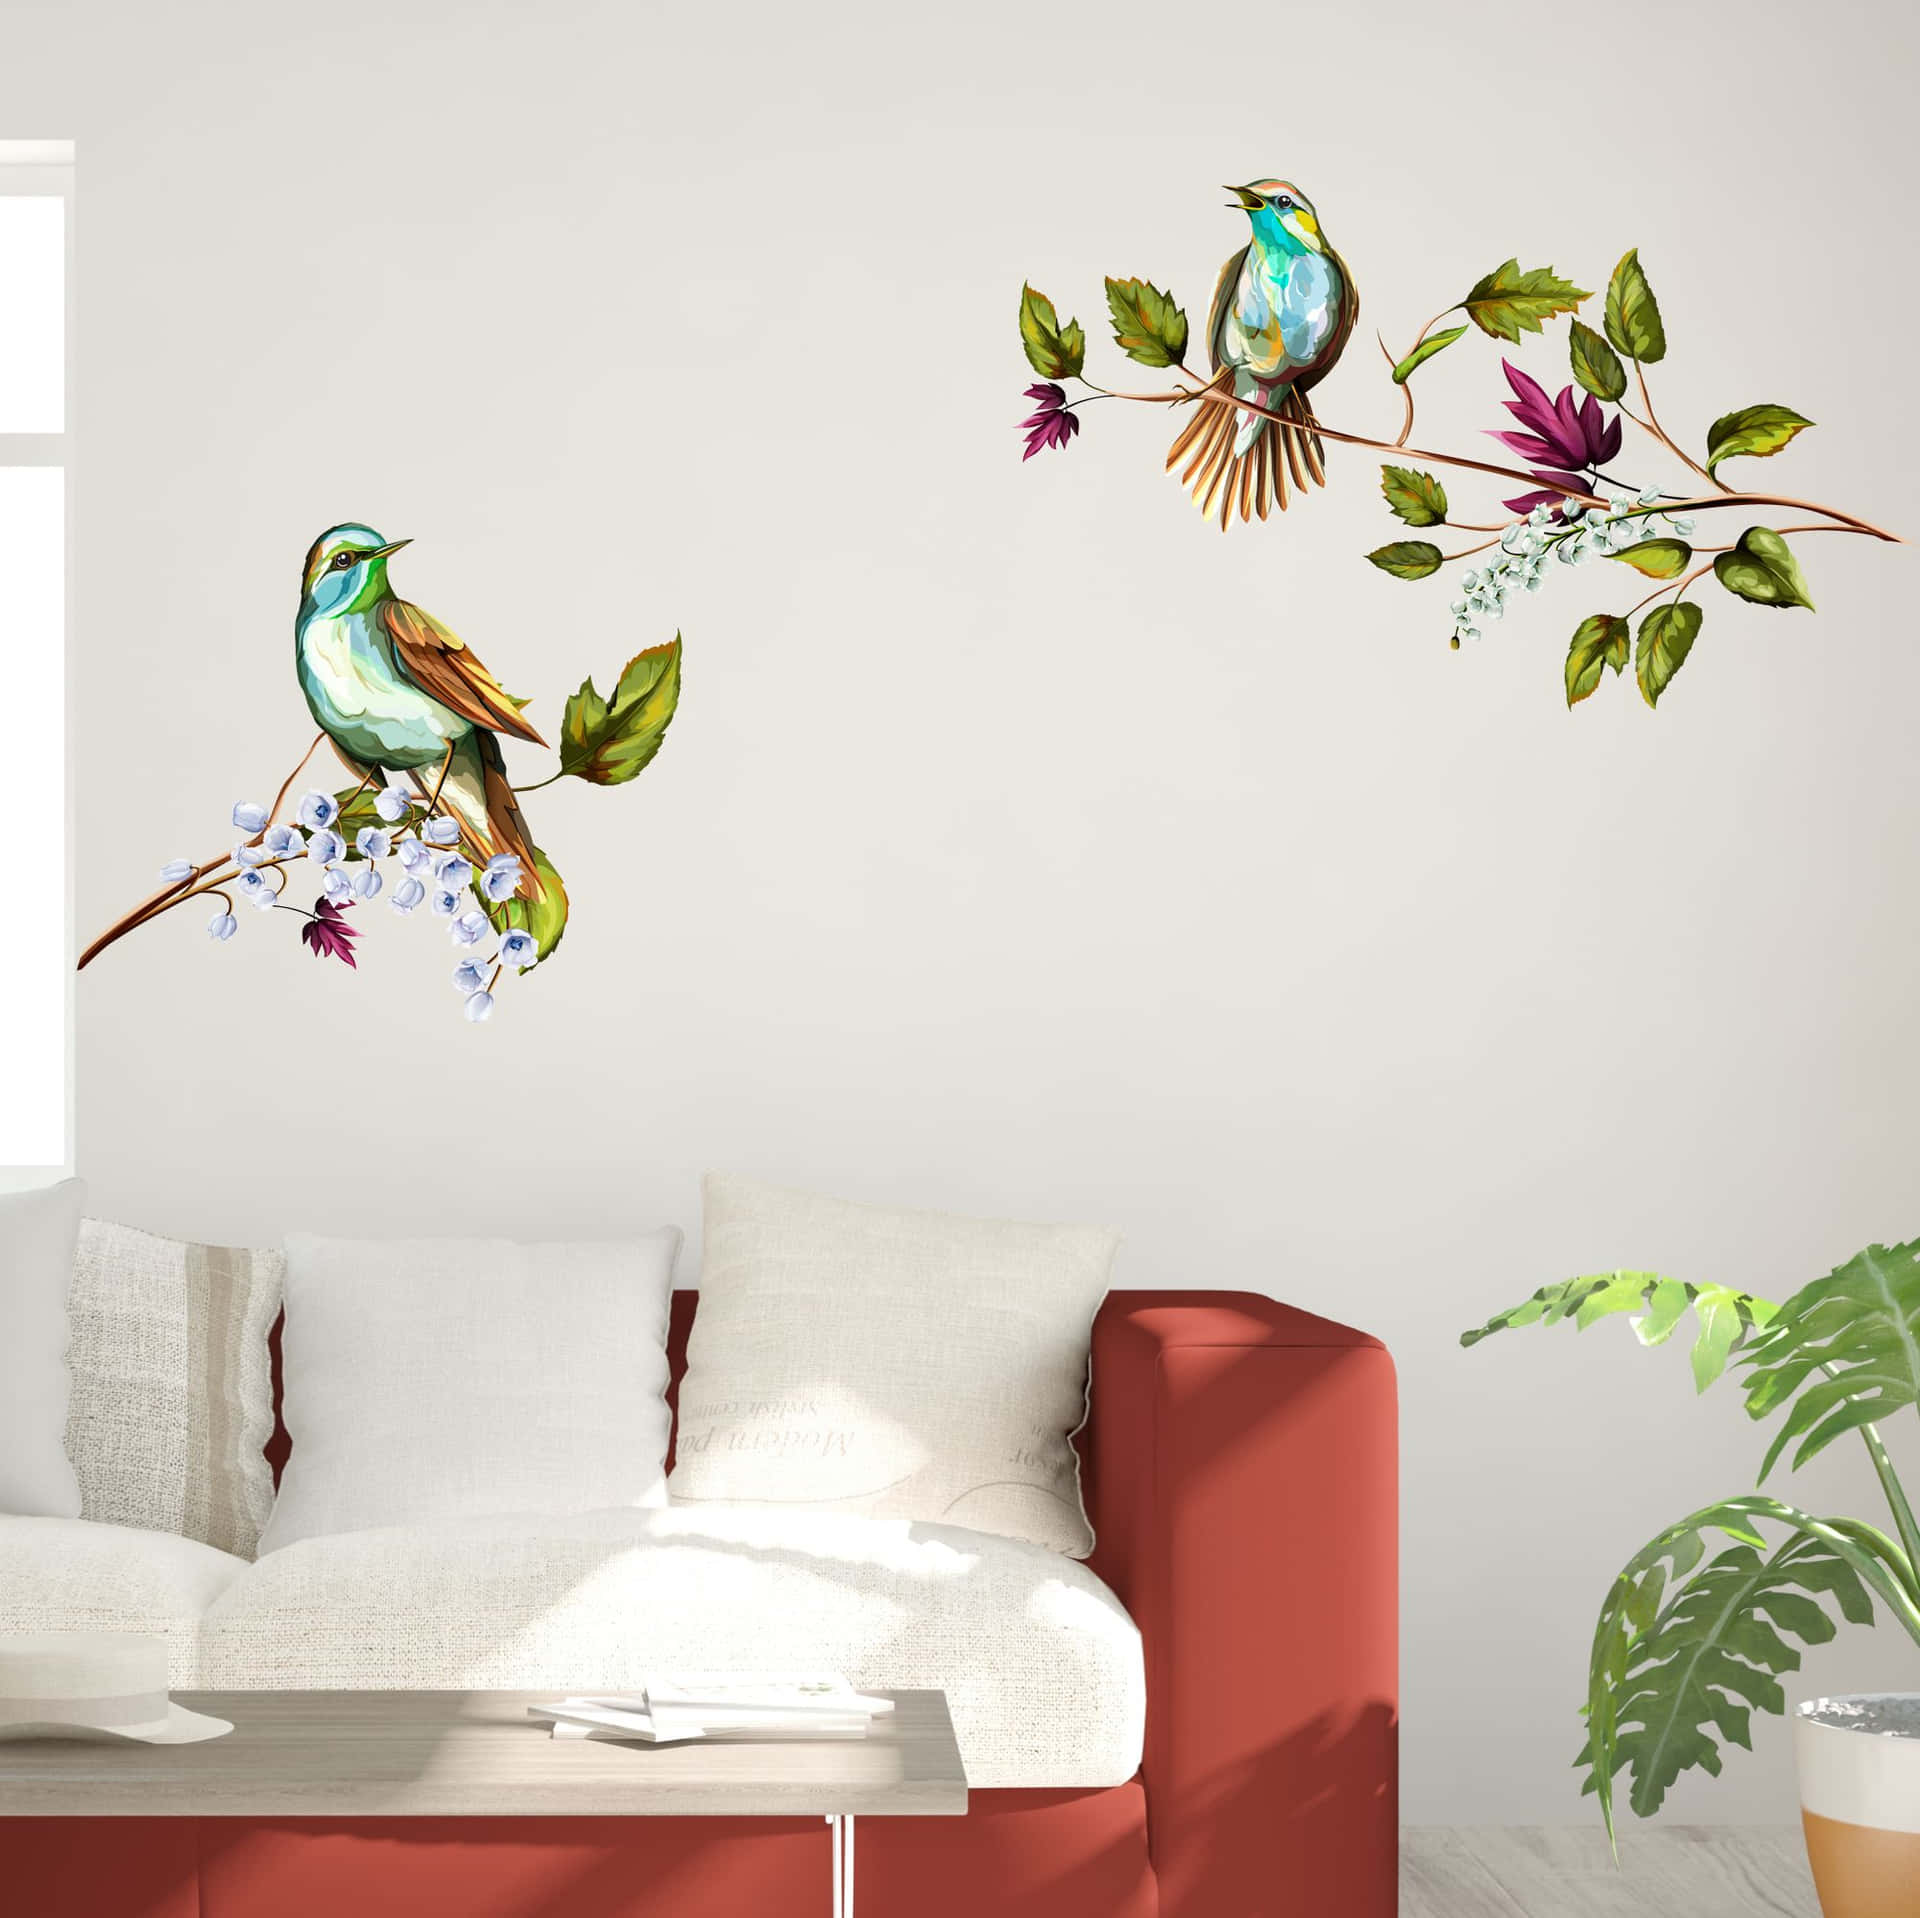 Two Birds On A Branch In A Living Room